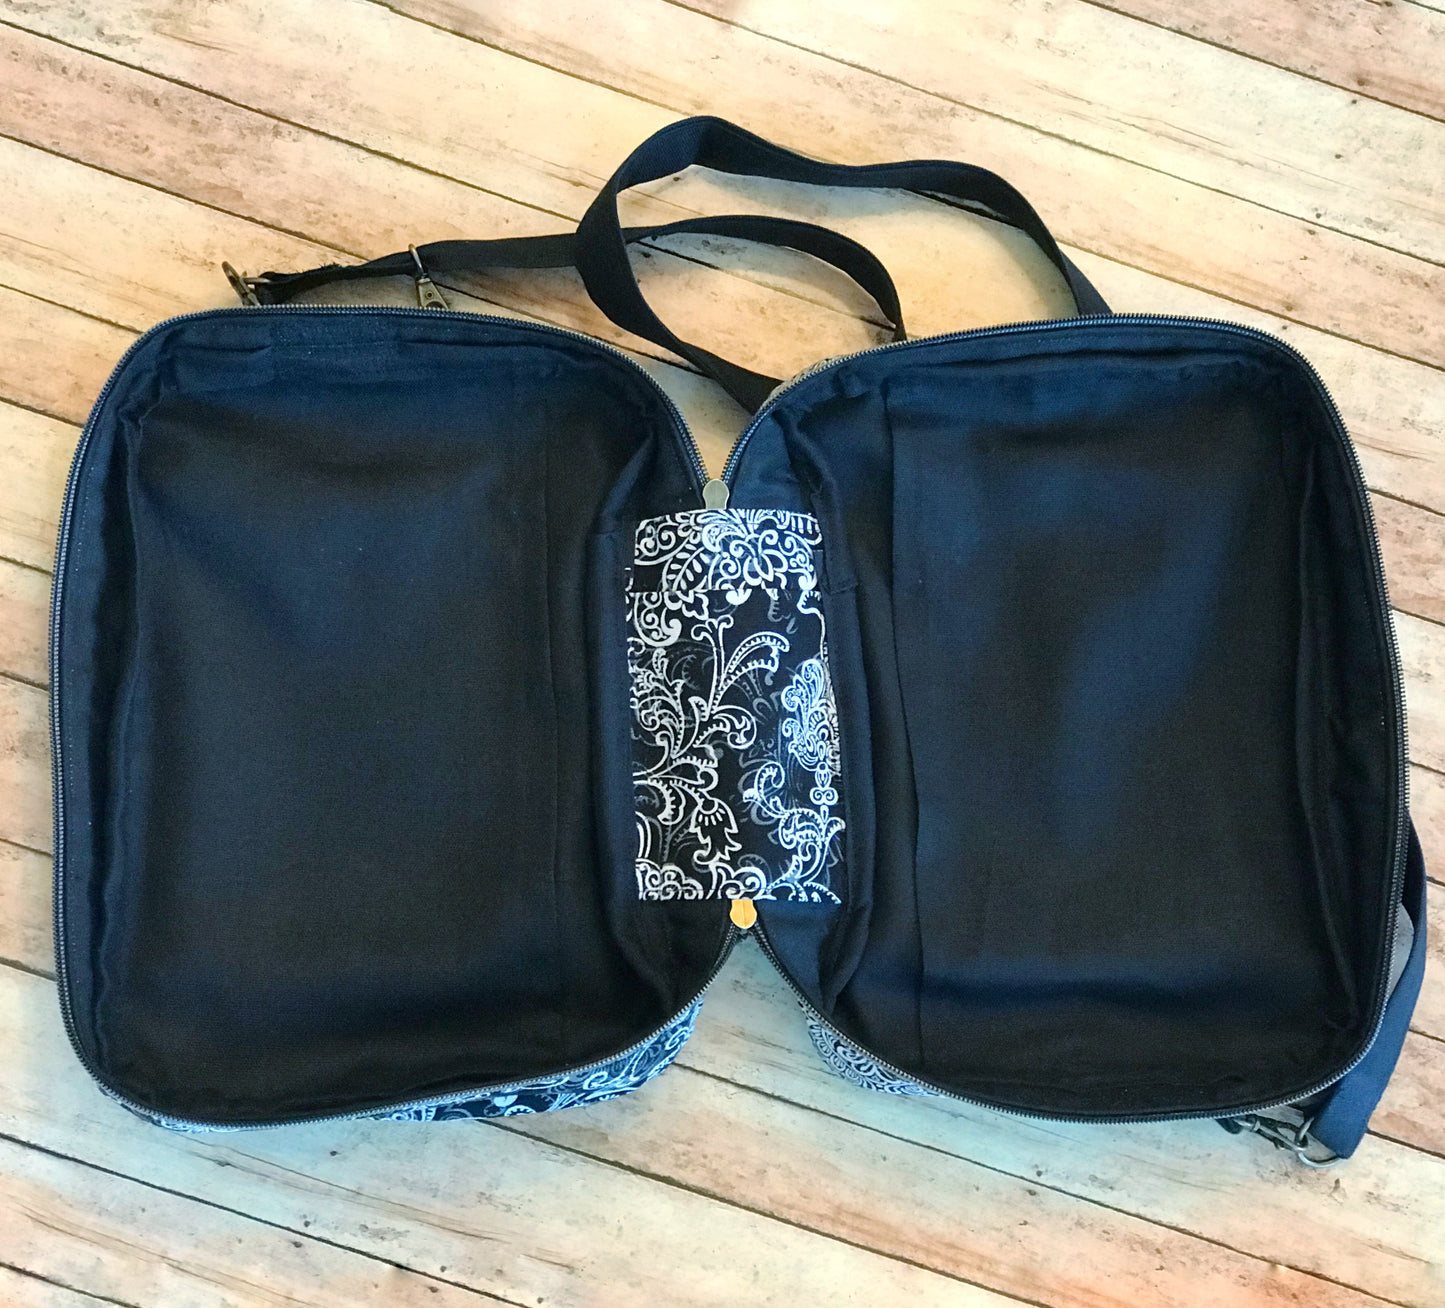 inside view of black white and charcoal Bible Bag; example shown is made to carry 1 book.